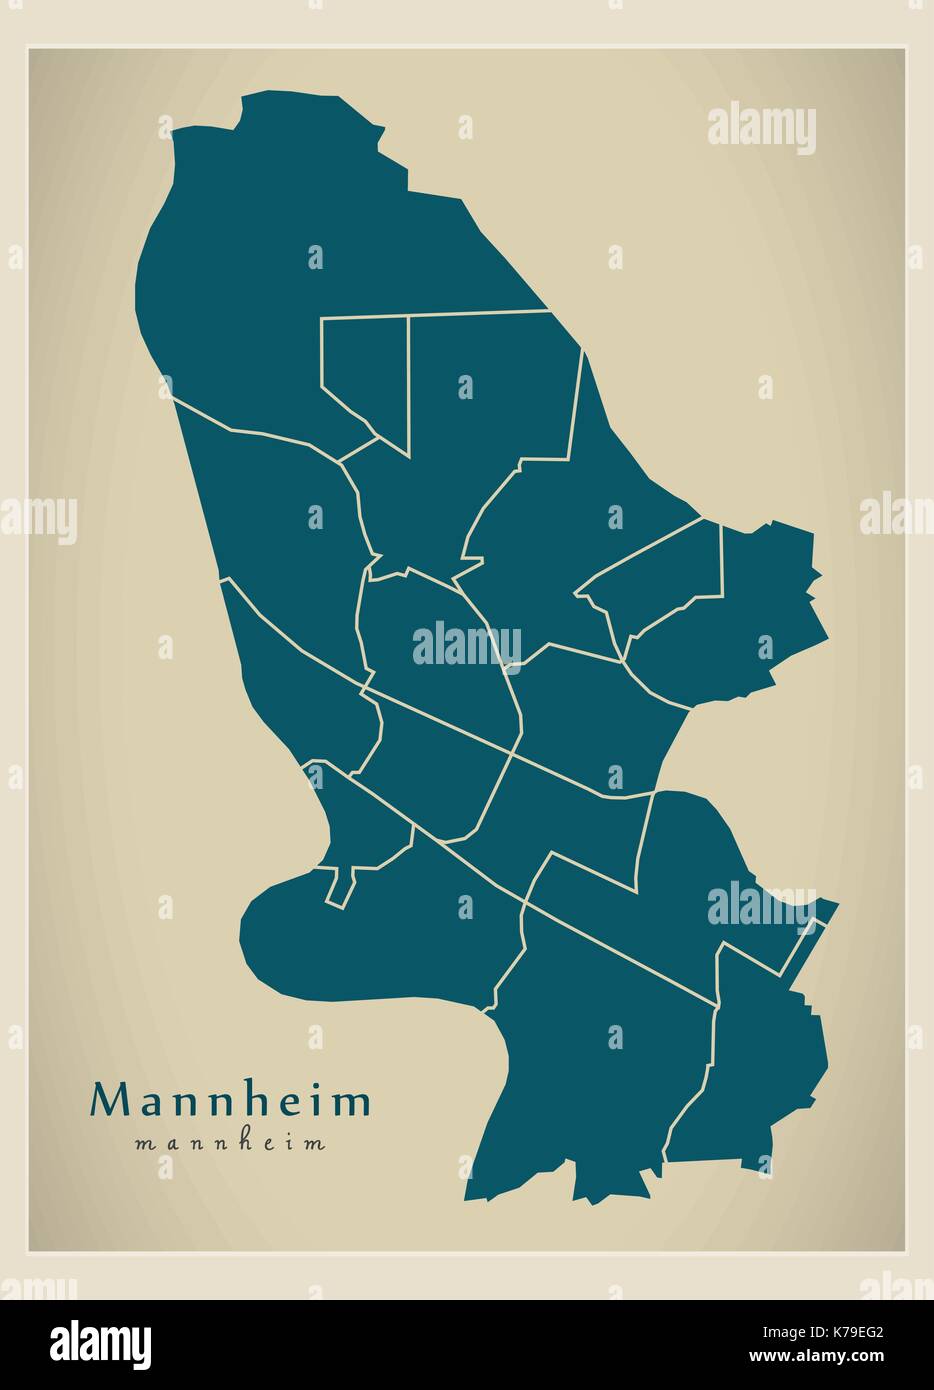 Modern City Map - Mannheim city of Germany with boroughs DE Stock Vector